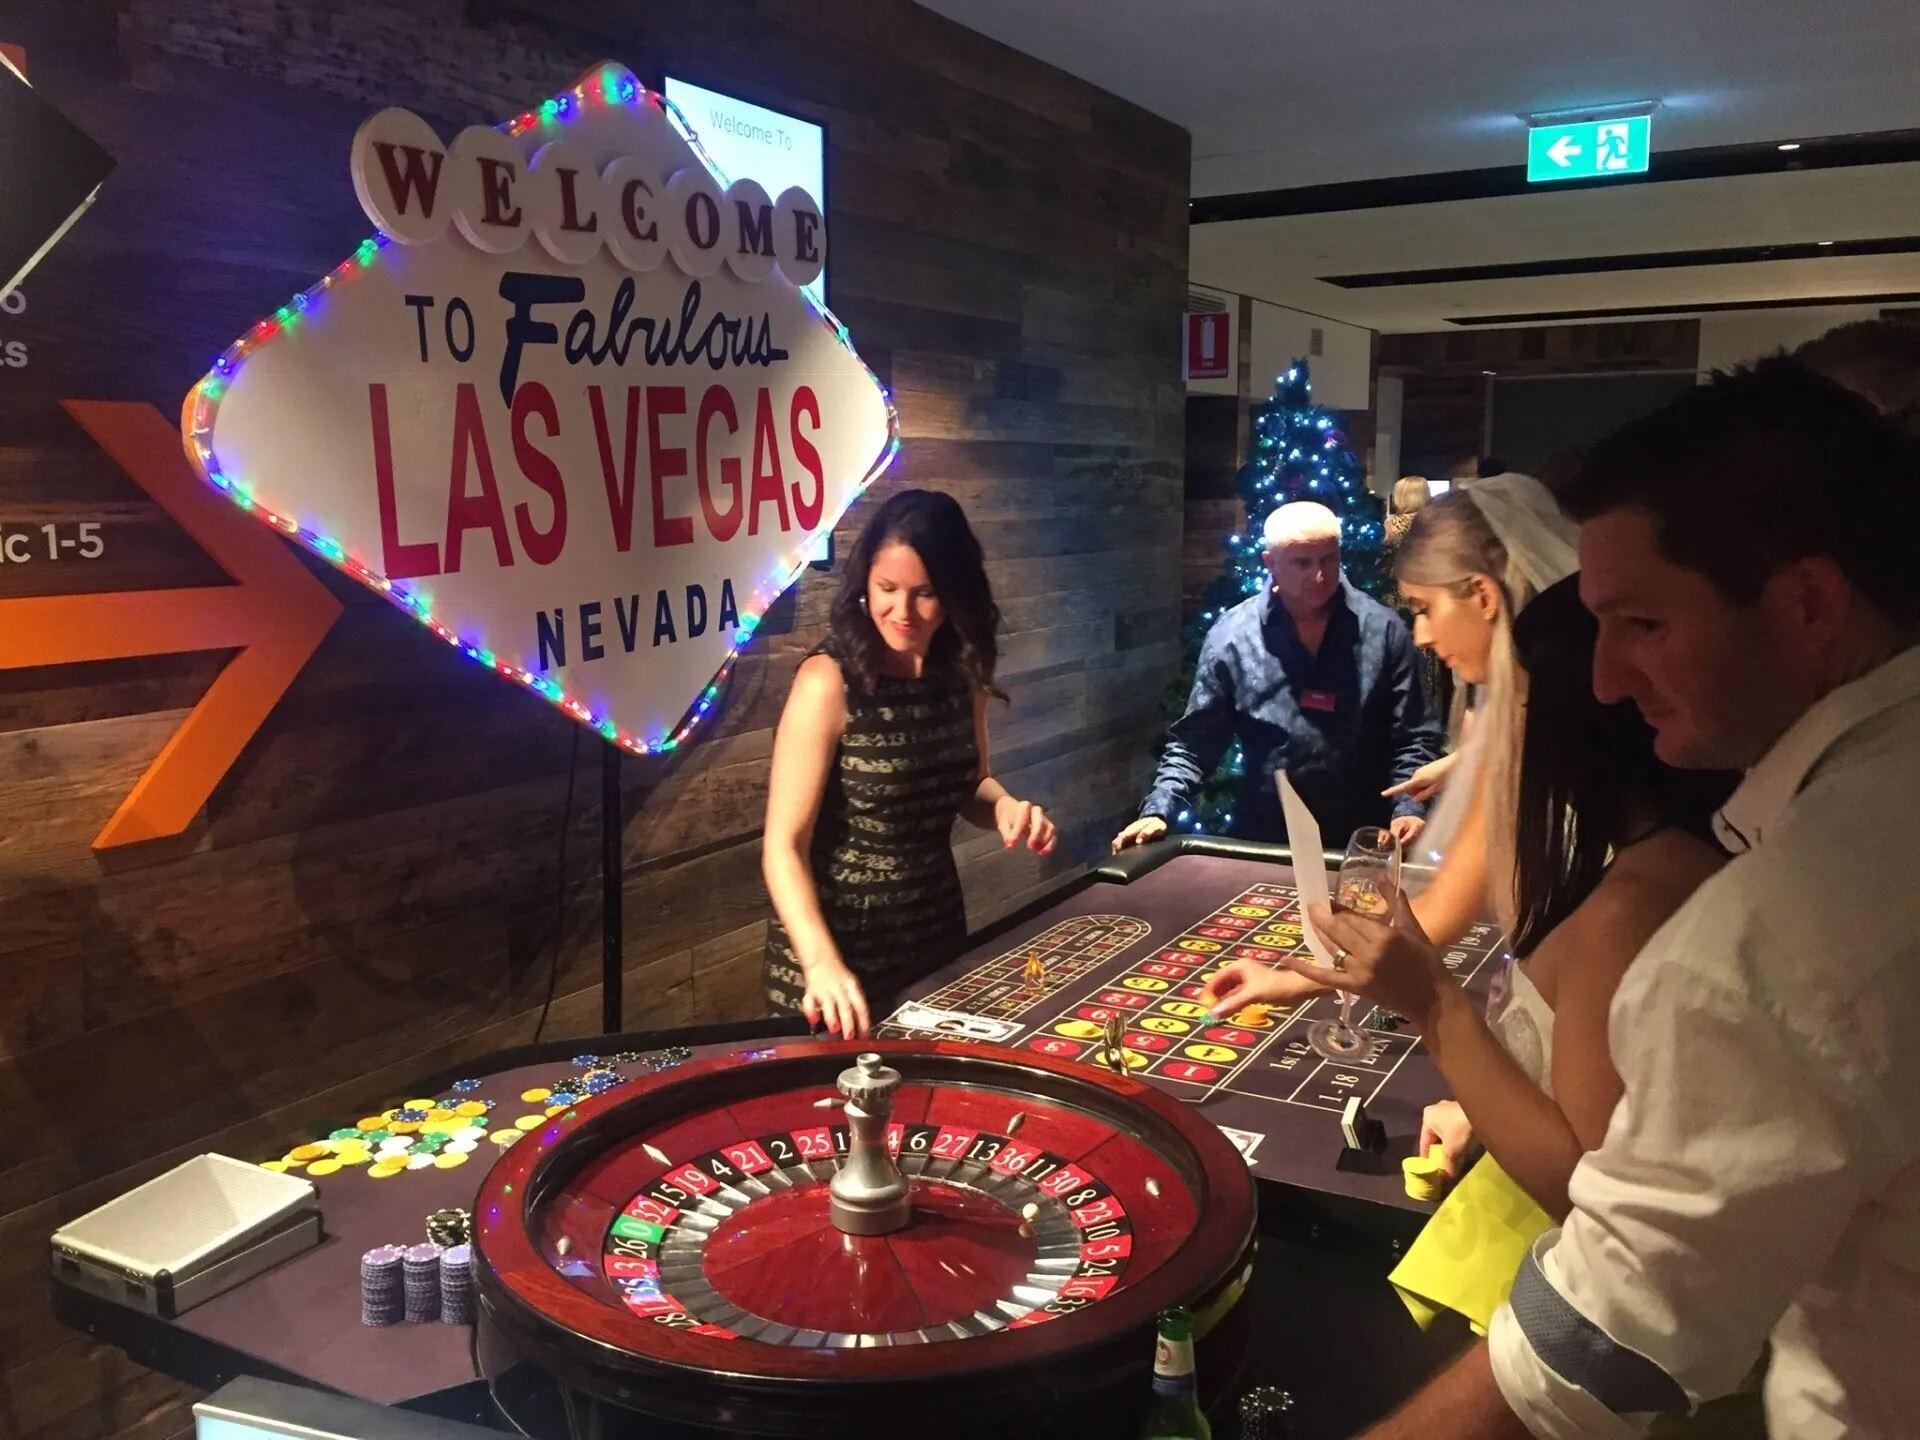 Looking For James Bond Casino Party Perth - Perth Other